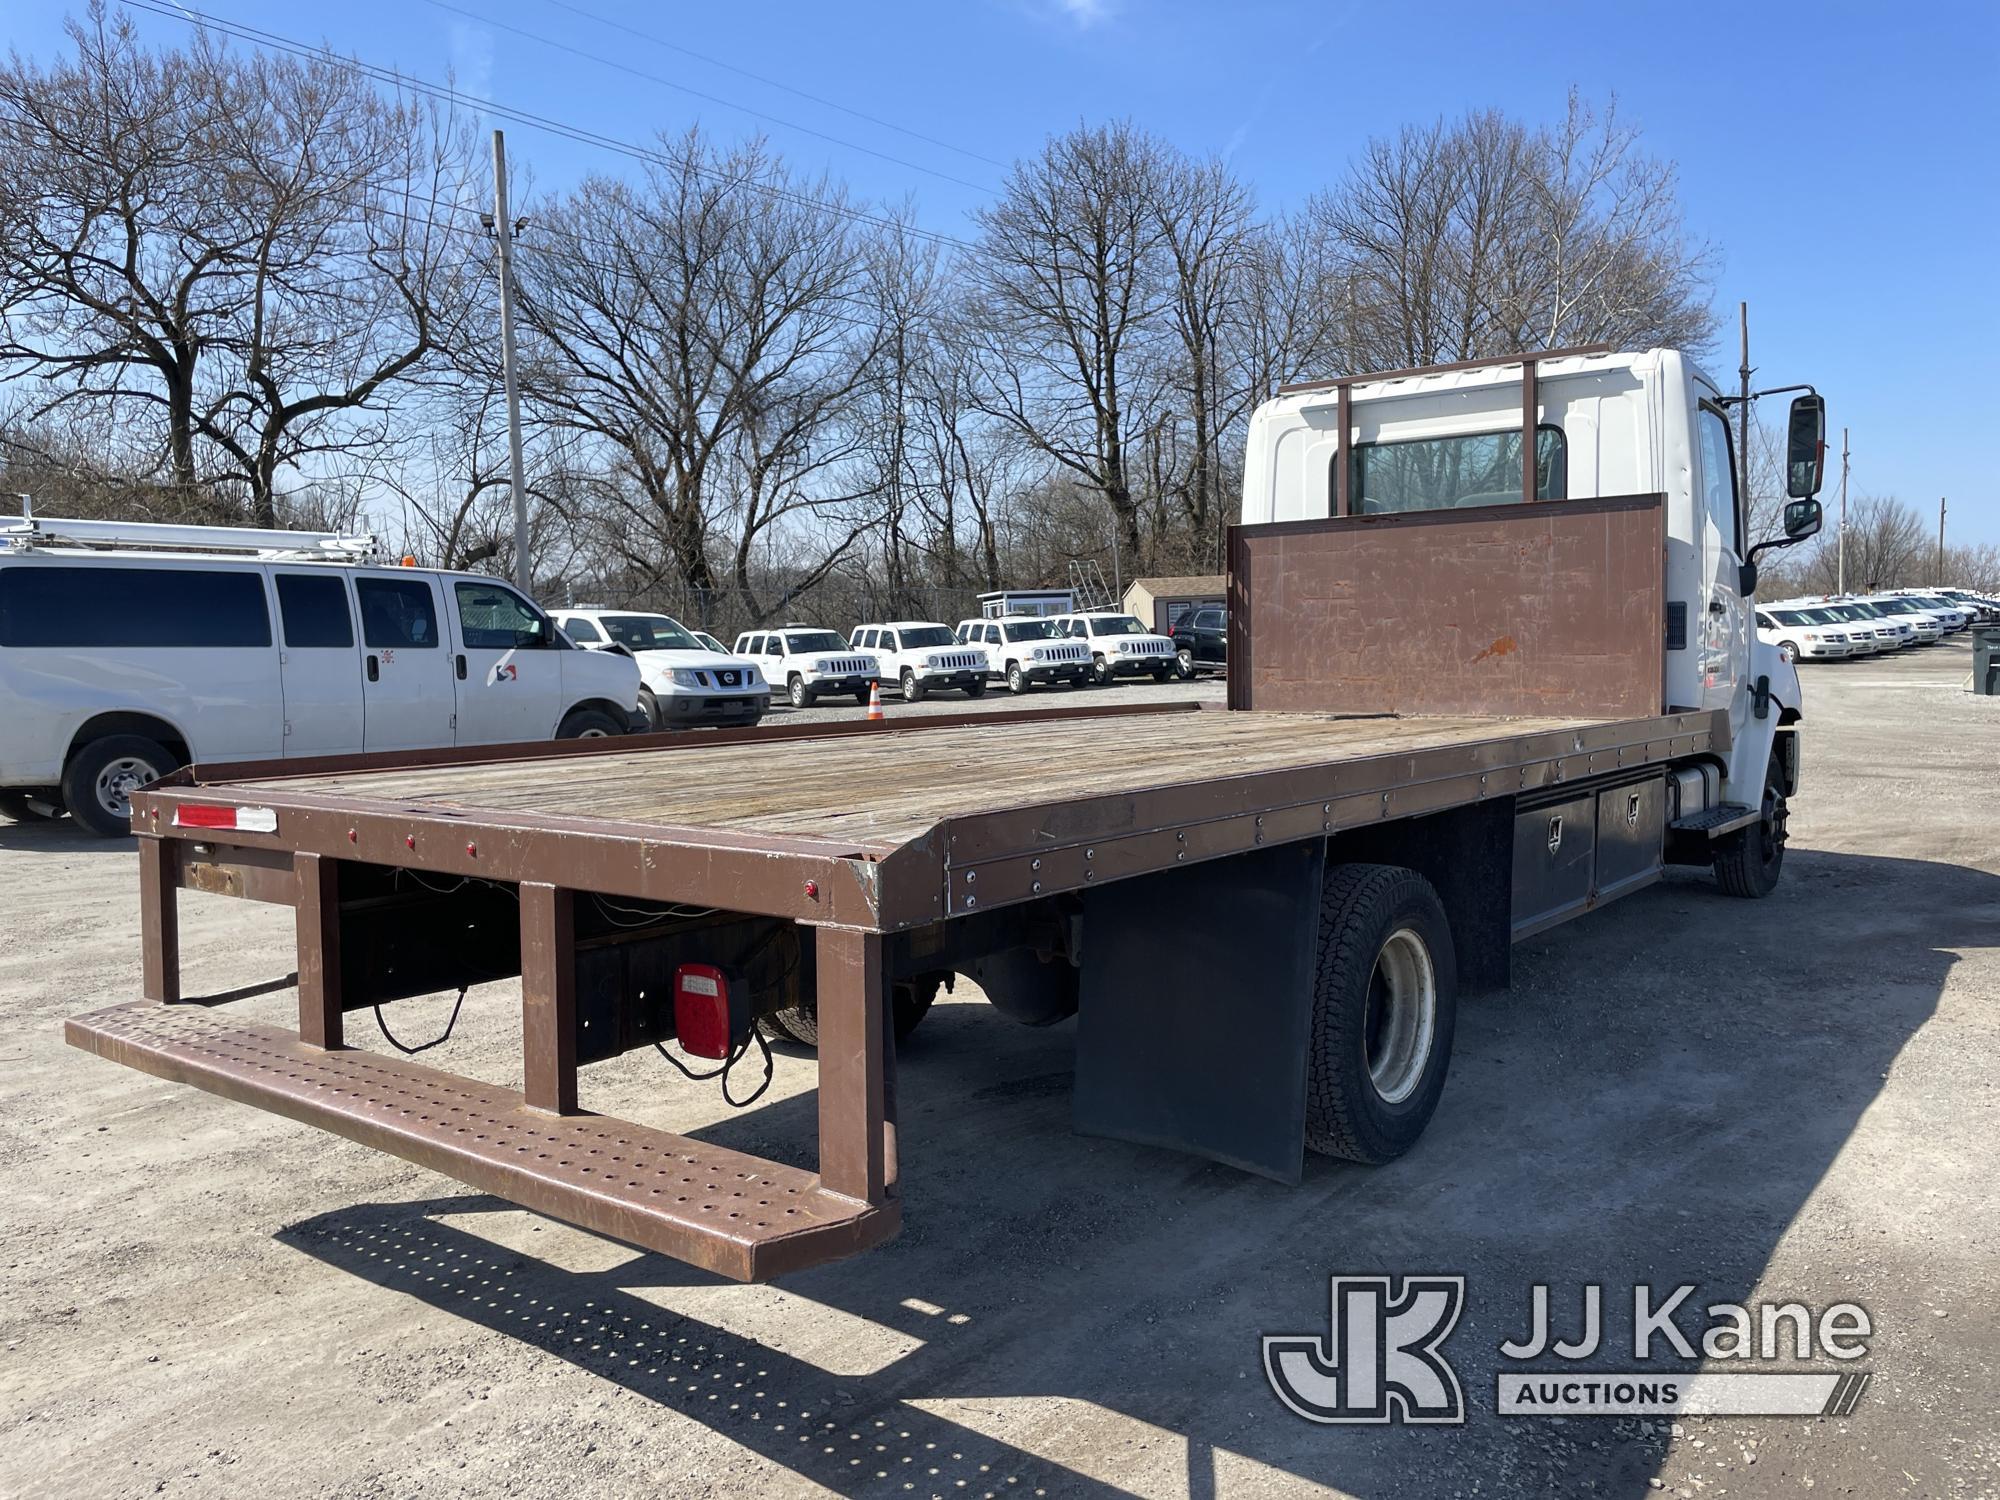 (Plymouth Meeting, PA) 2005 Hino 145 Flatbed Truck Runs & Moves, Abs Light On, Body & Rust Damage